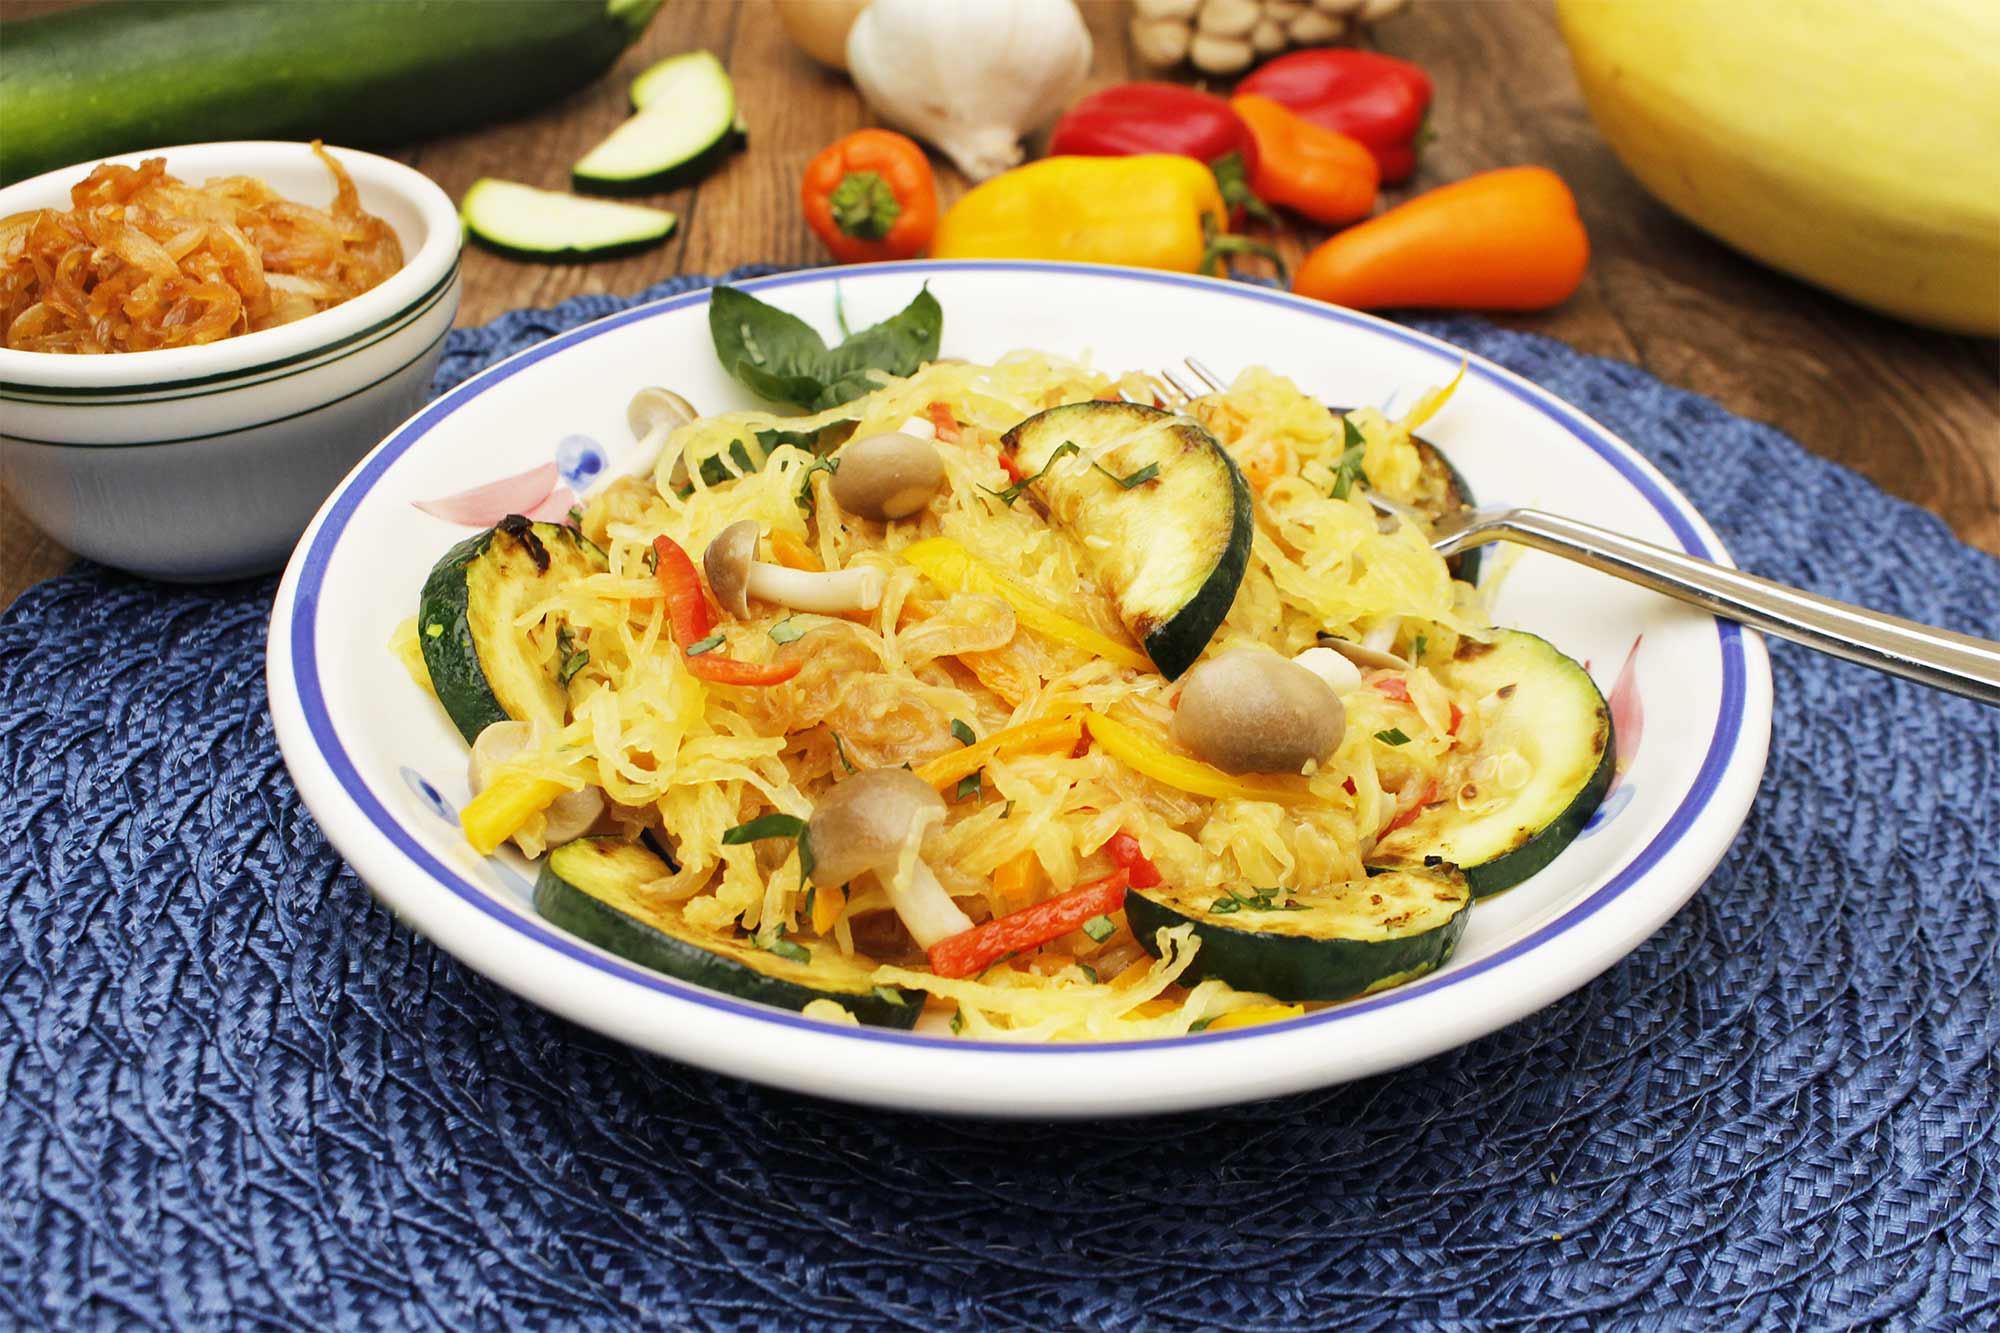 Spaghetti Squash with Caramelized Onions and Zucchini